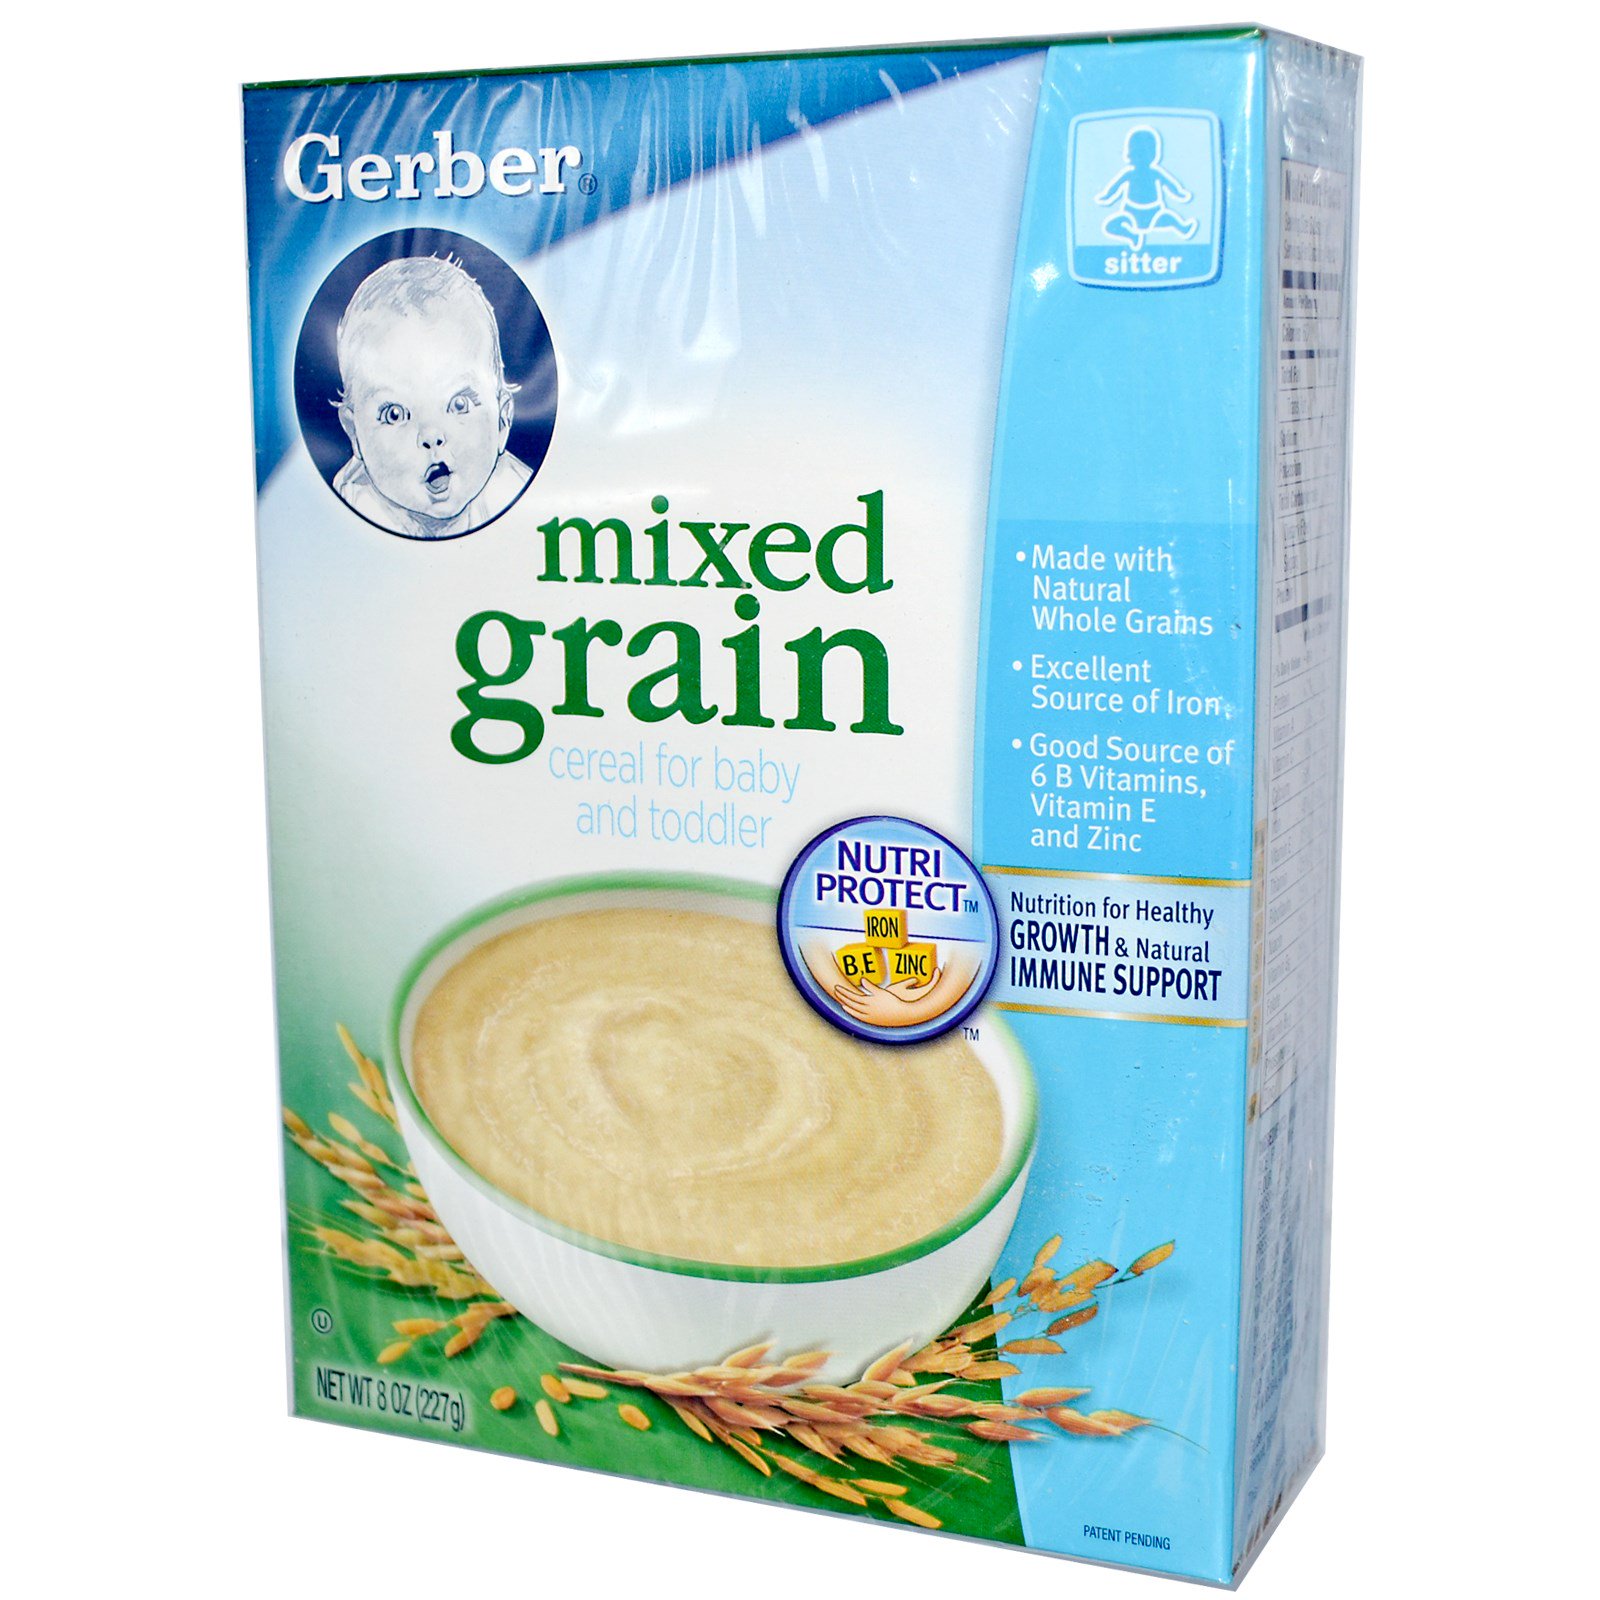 Gerber, Cereal for Baby and Toddler, Mixed Grain, 8 oz (227 g) - iHerb